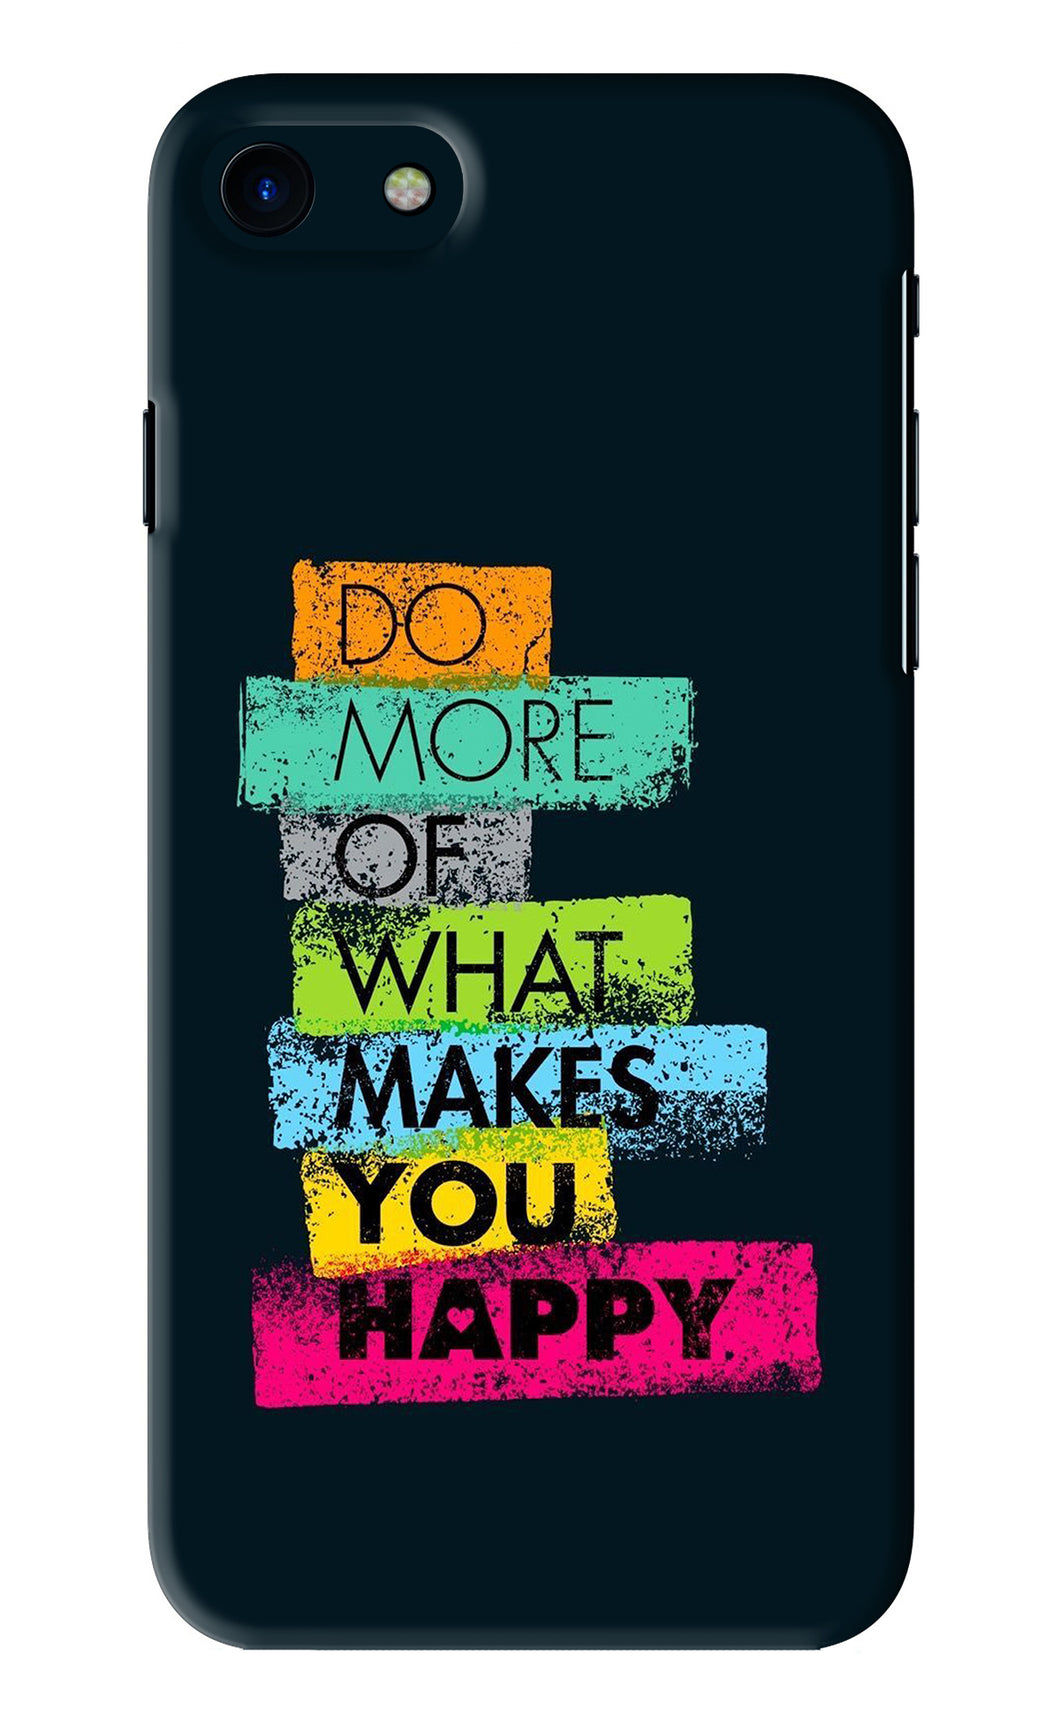 Do More Of What Makes You Happy iPhone SE 2020 Back Skin Wrap